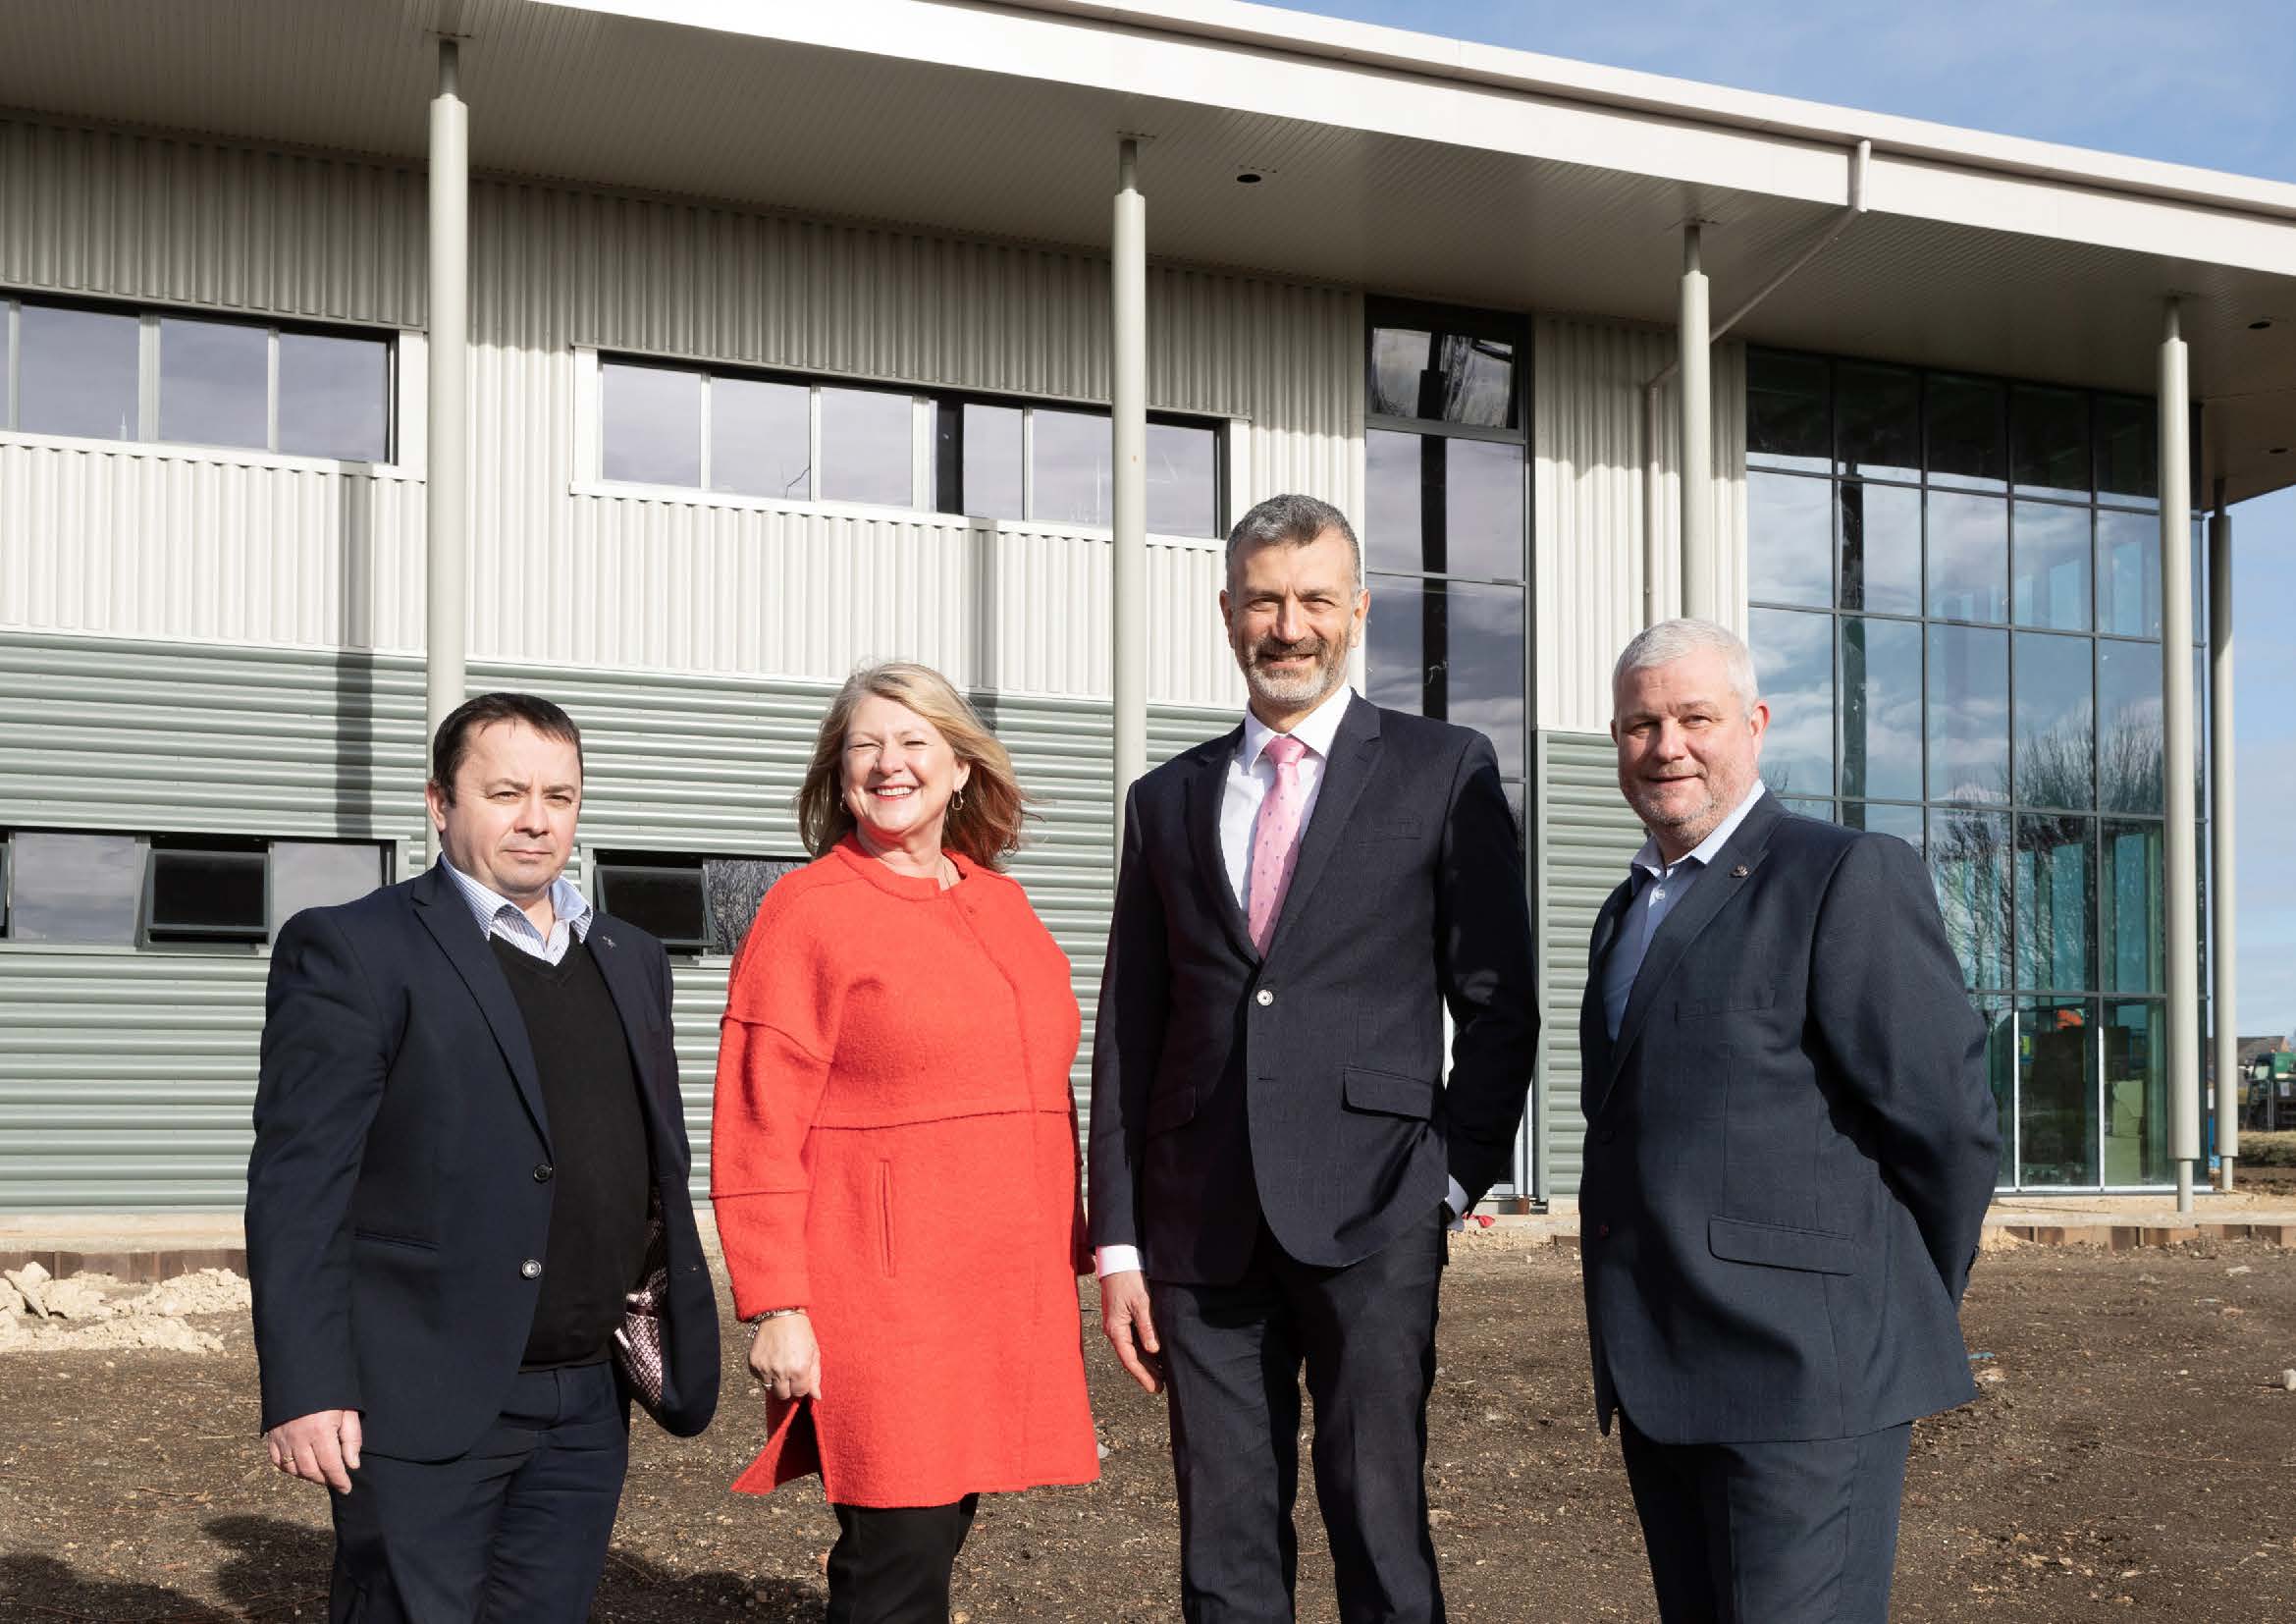 Partnership agreed for NCTC apprentice training centre